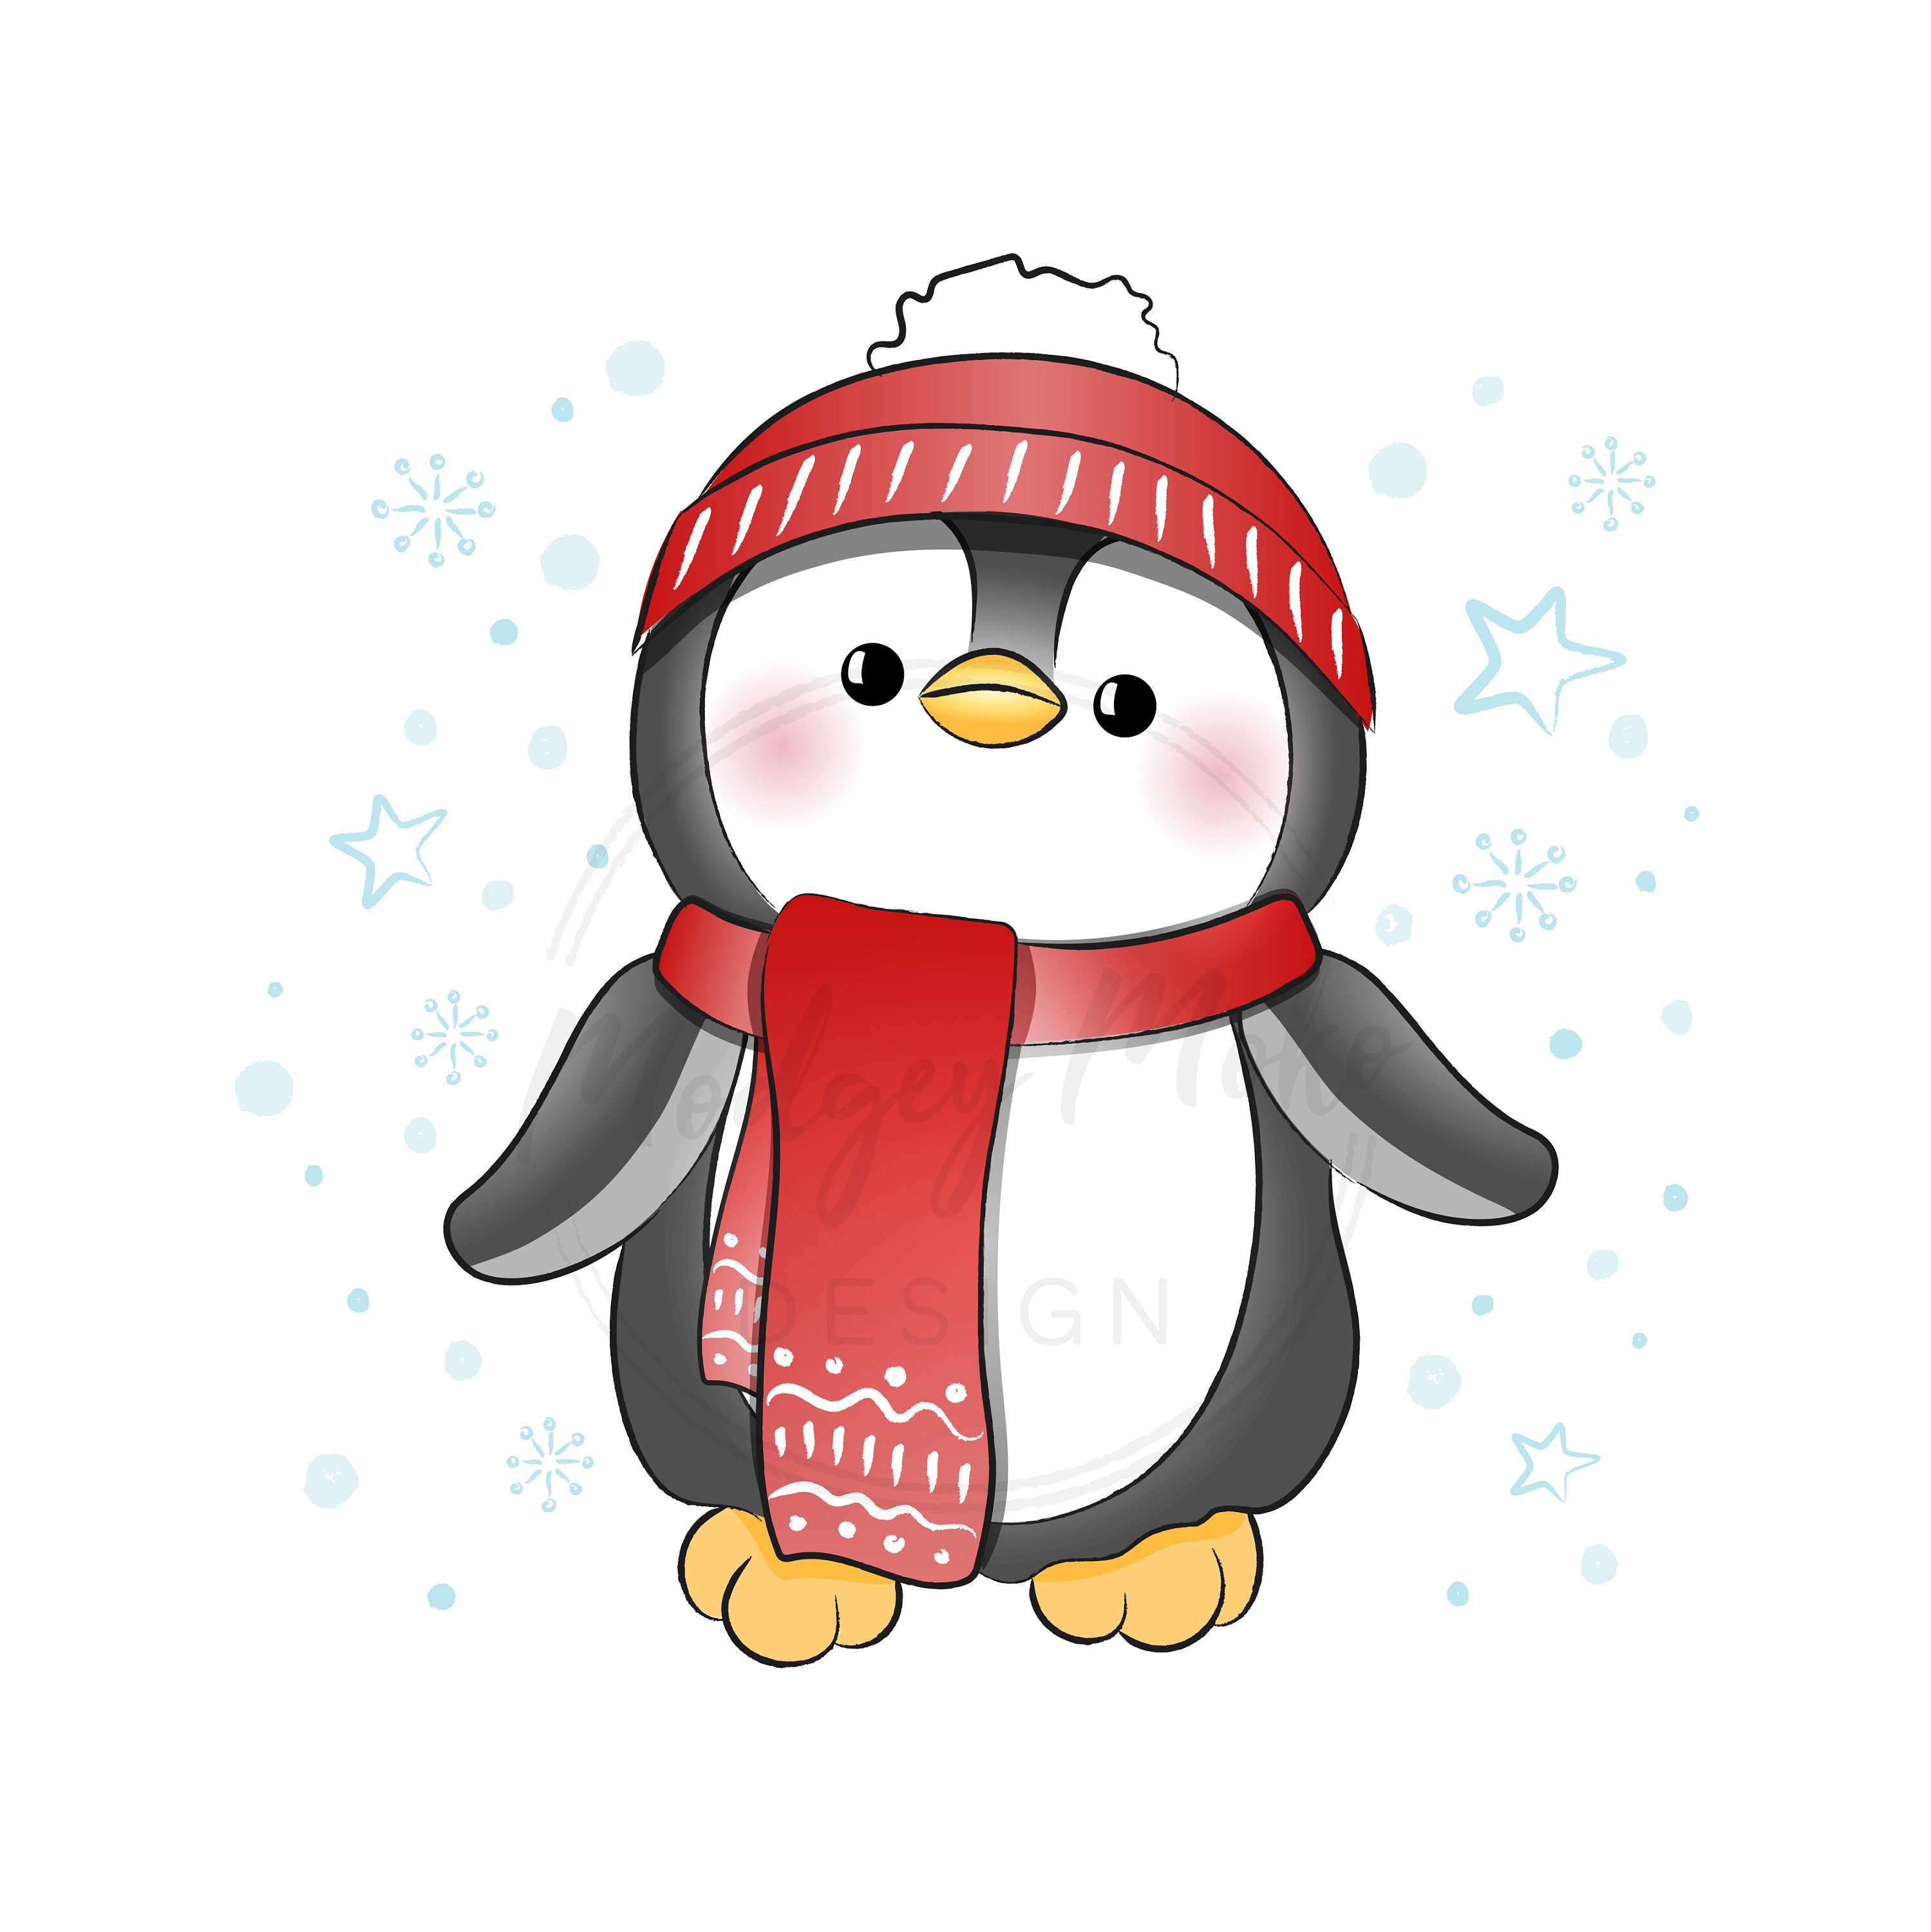 PNG, AI, JPG, Clip Art of Cute Winter Penguin, cosy hat and scarf, stars  and snowflakes